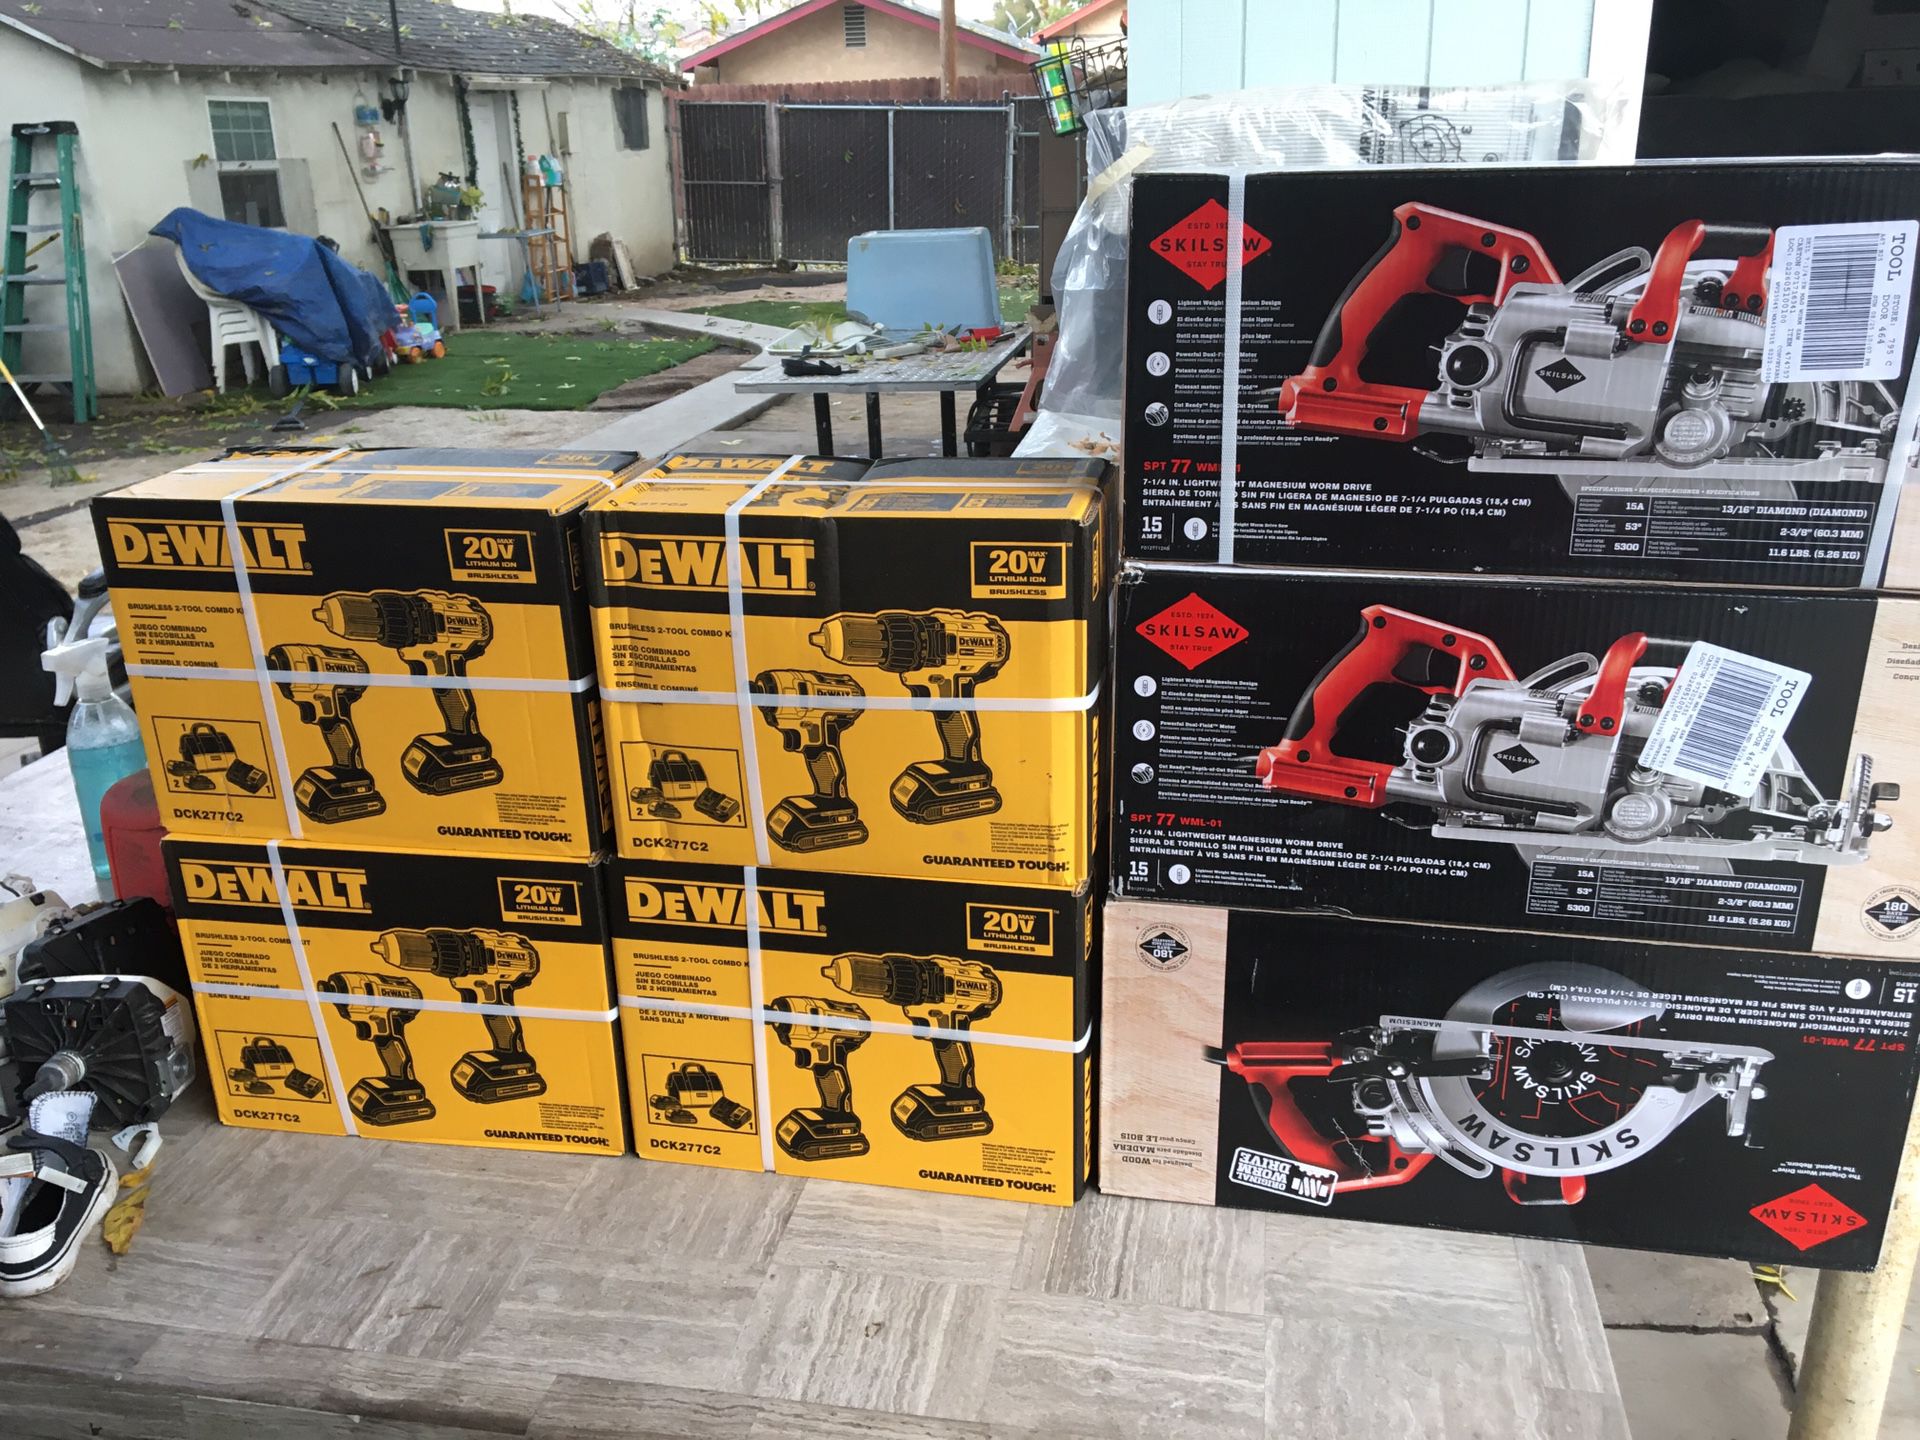 Brand new tools for sale